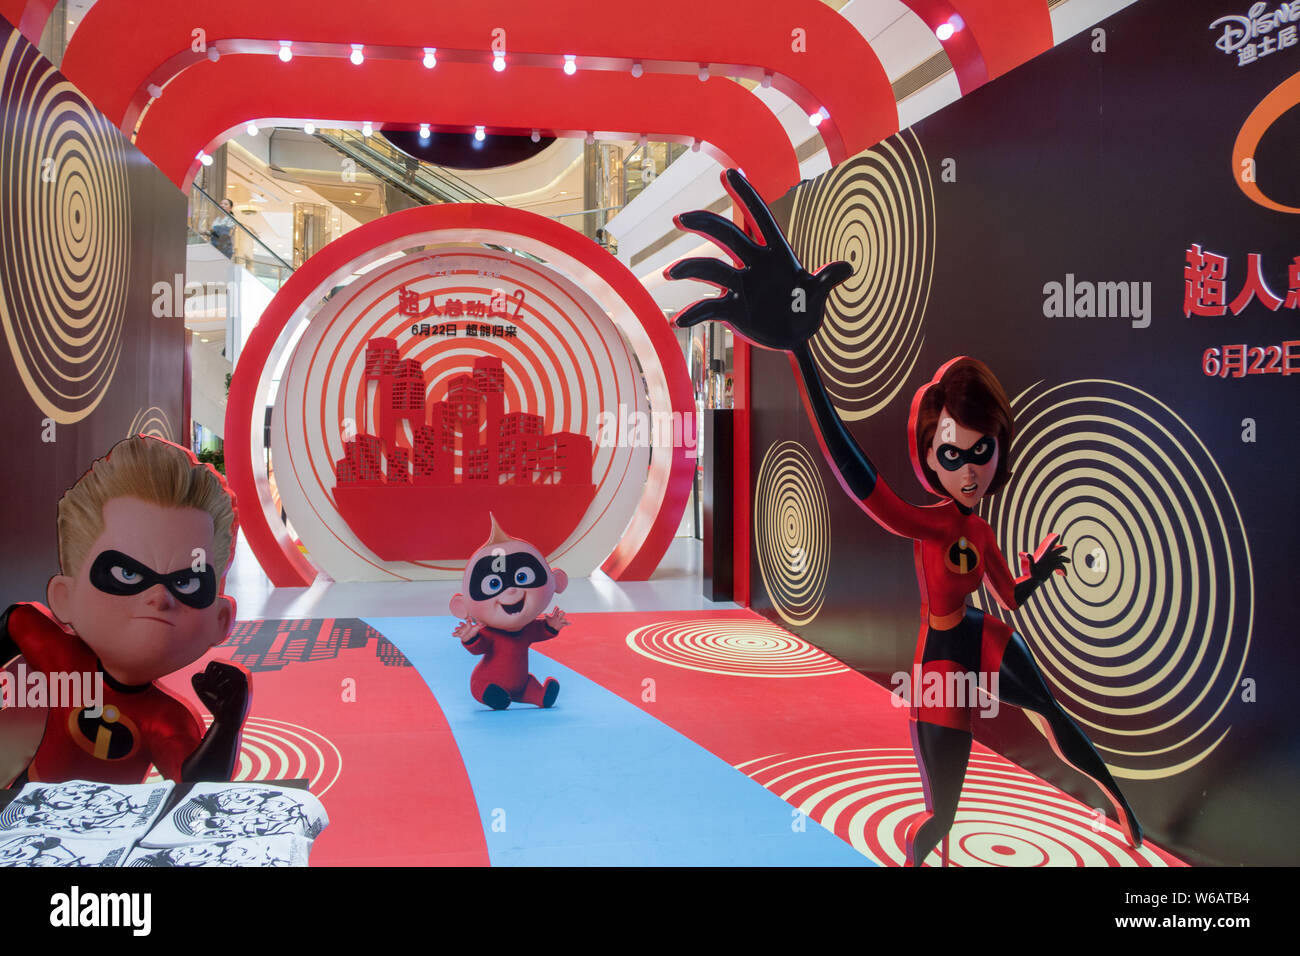 View of the exhibition on the theme of American 3D computer-animated  superhero film 